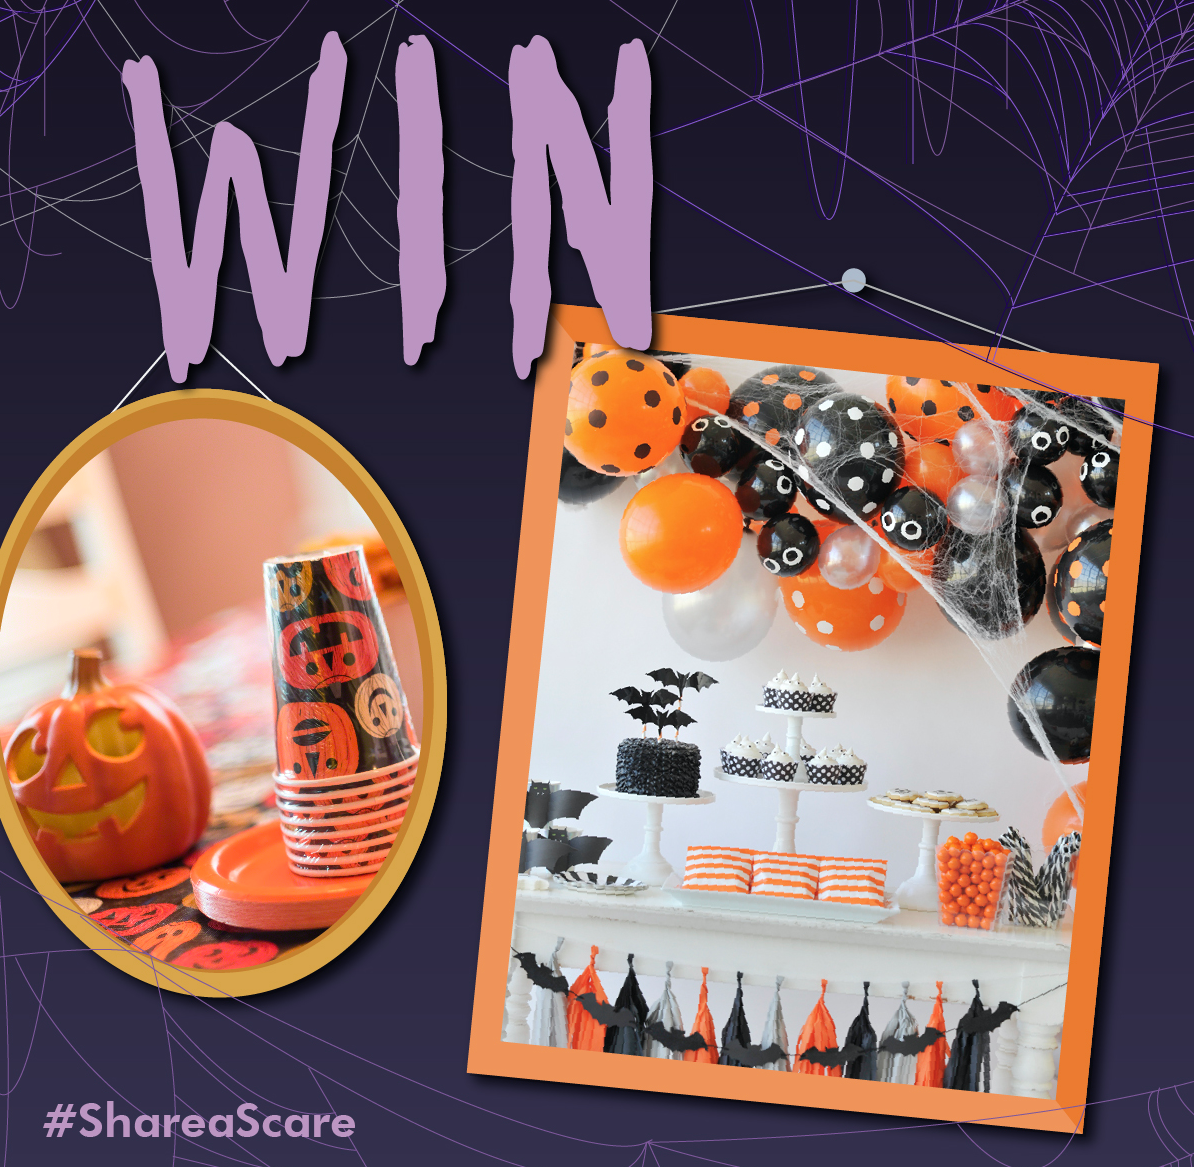 COMPETITION: Win a Halloween Party Pack at Citywest Shopping Centre!